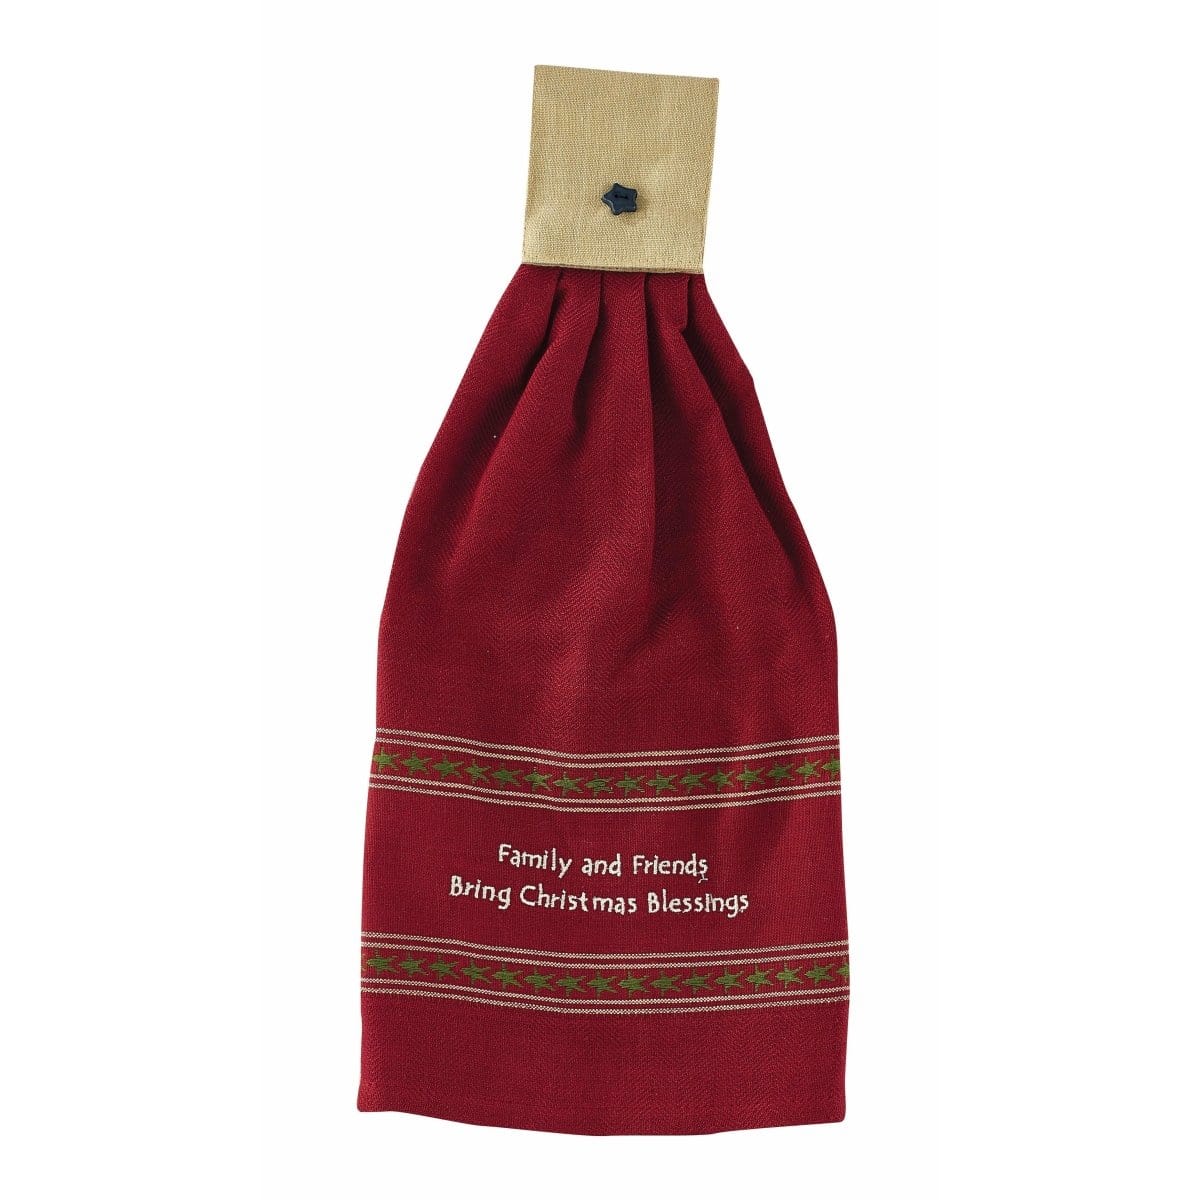 Family And Friends Bring Christmas Blessings Hand Towel-Park Designs-The Village Merchant